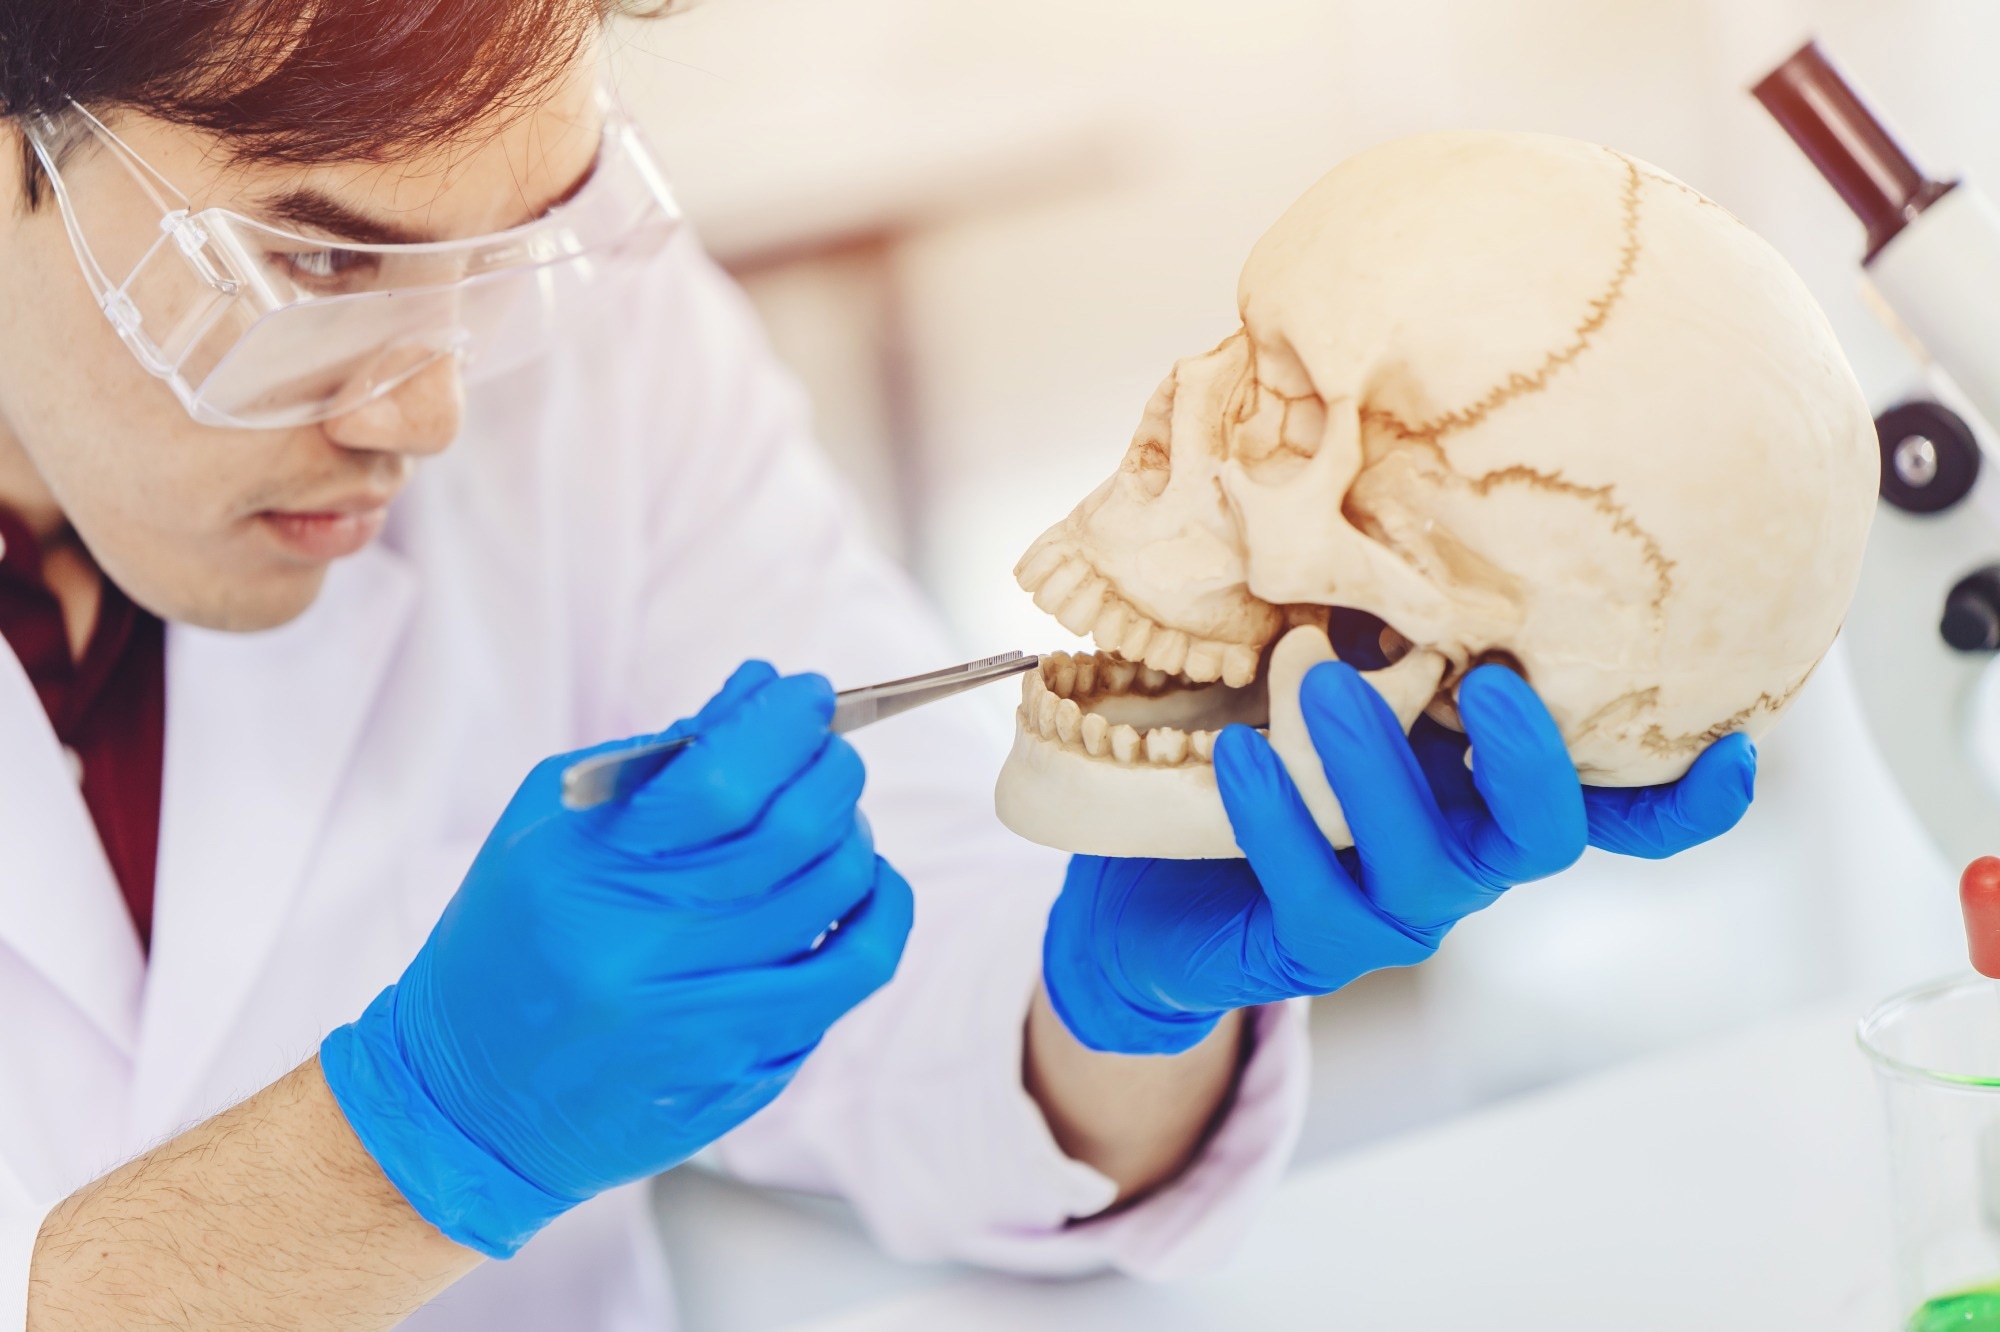 Study: Caries prevalence and other dental pathological conditions in Vikings from Varnhem, Sweden. Image Credit: Quality Stock Arts / Shutterstock.com